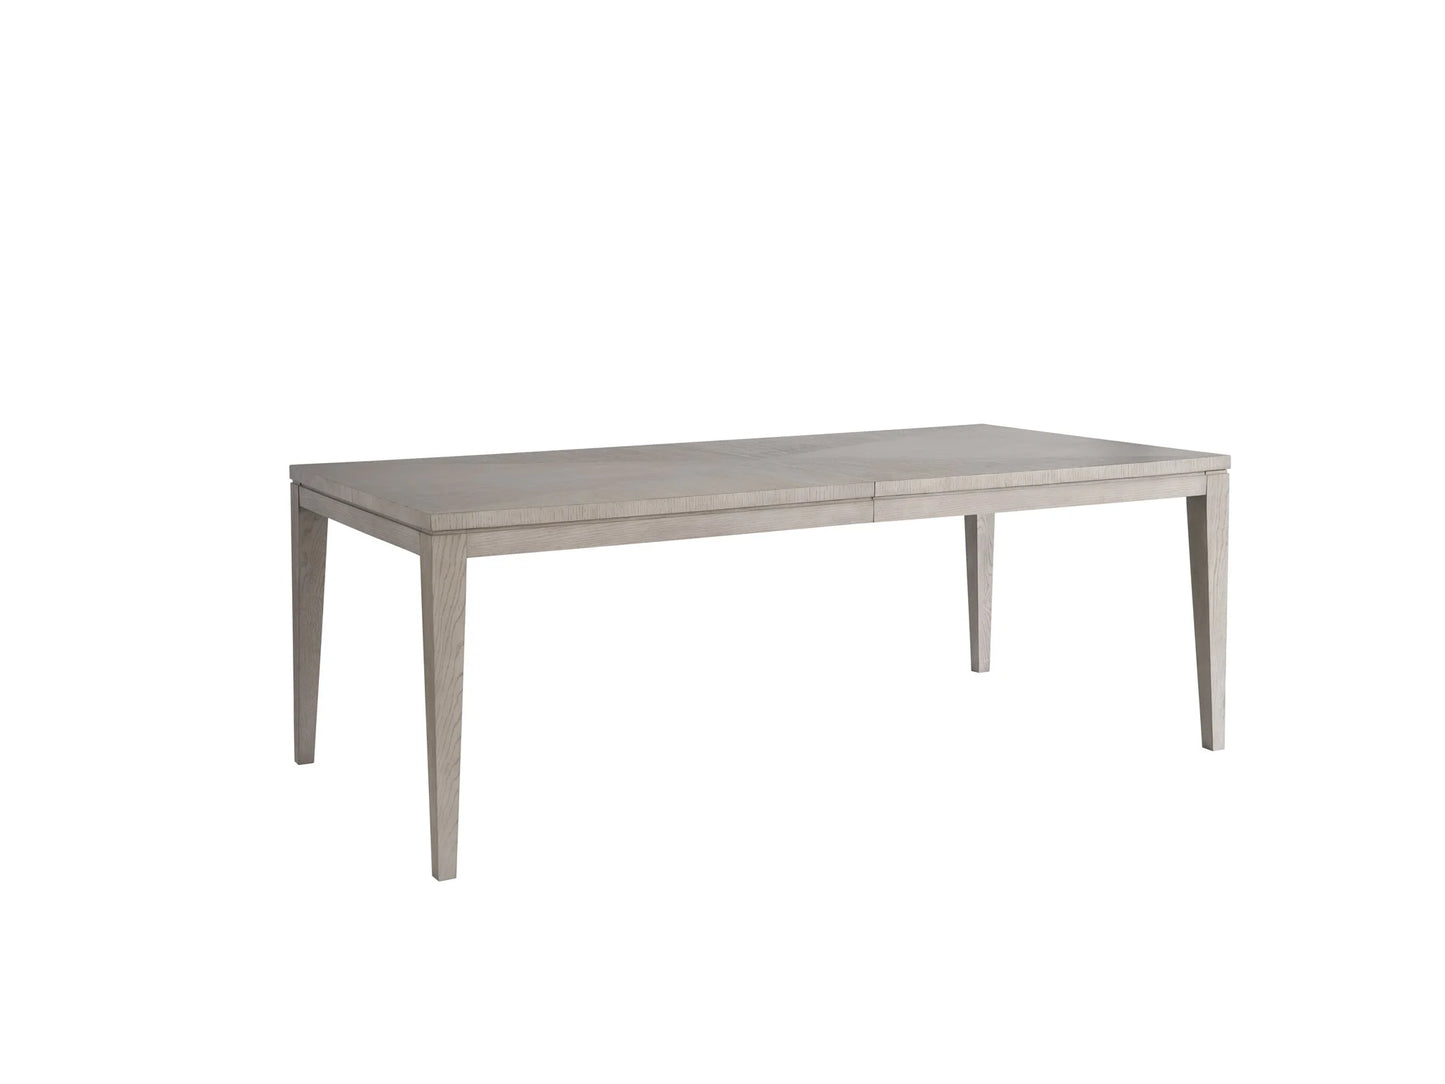 UNIVERSAL - COALESCE DINING TABLE